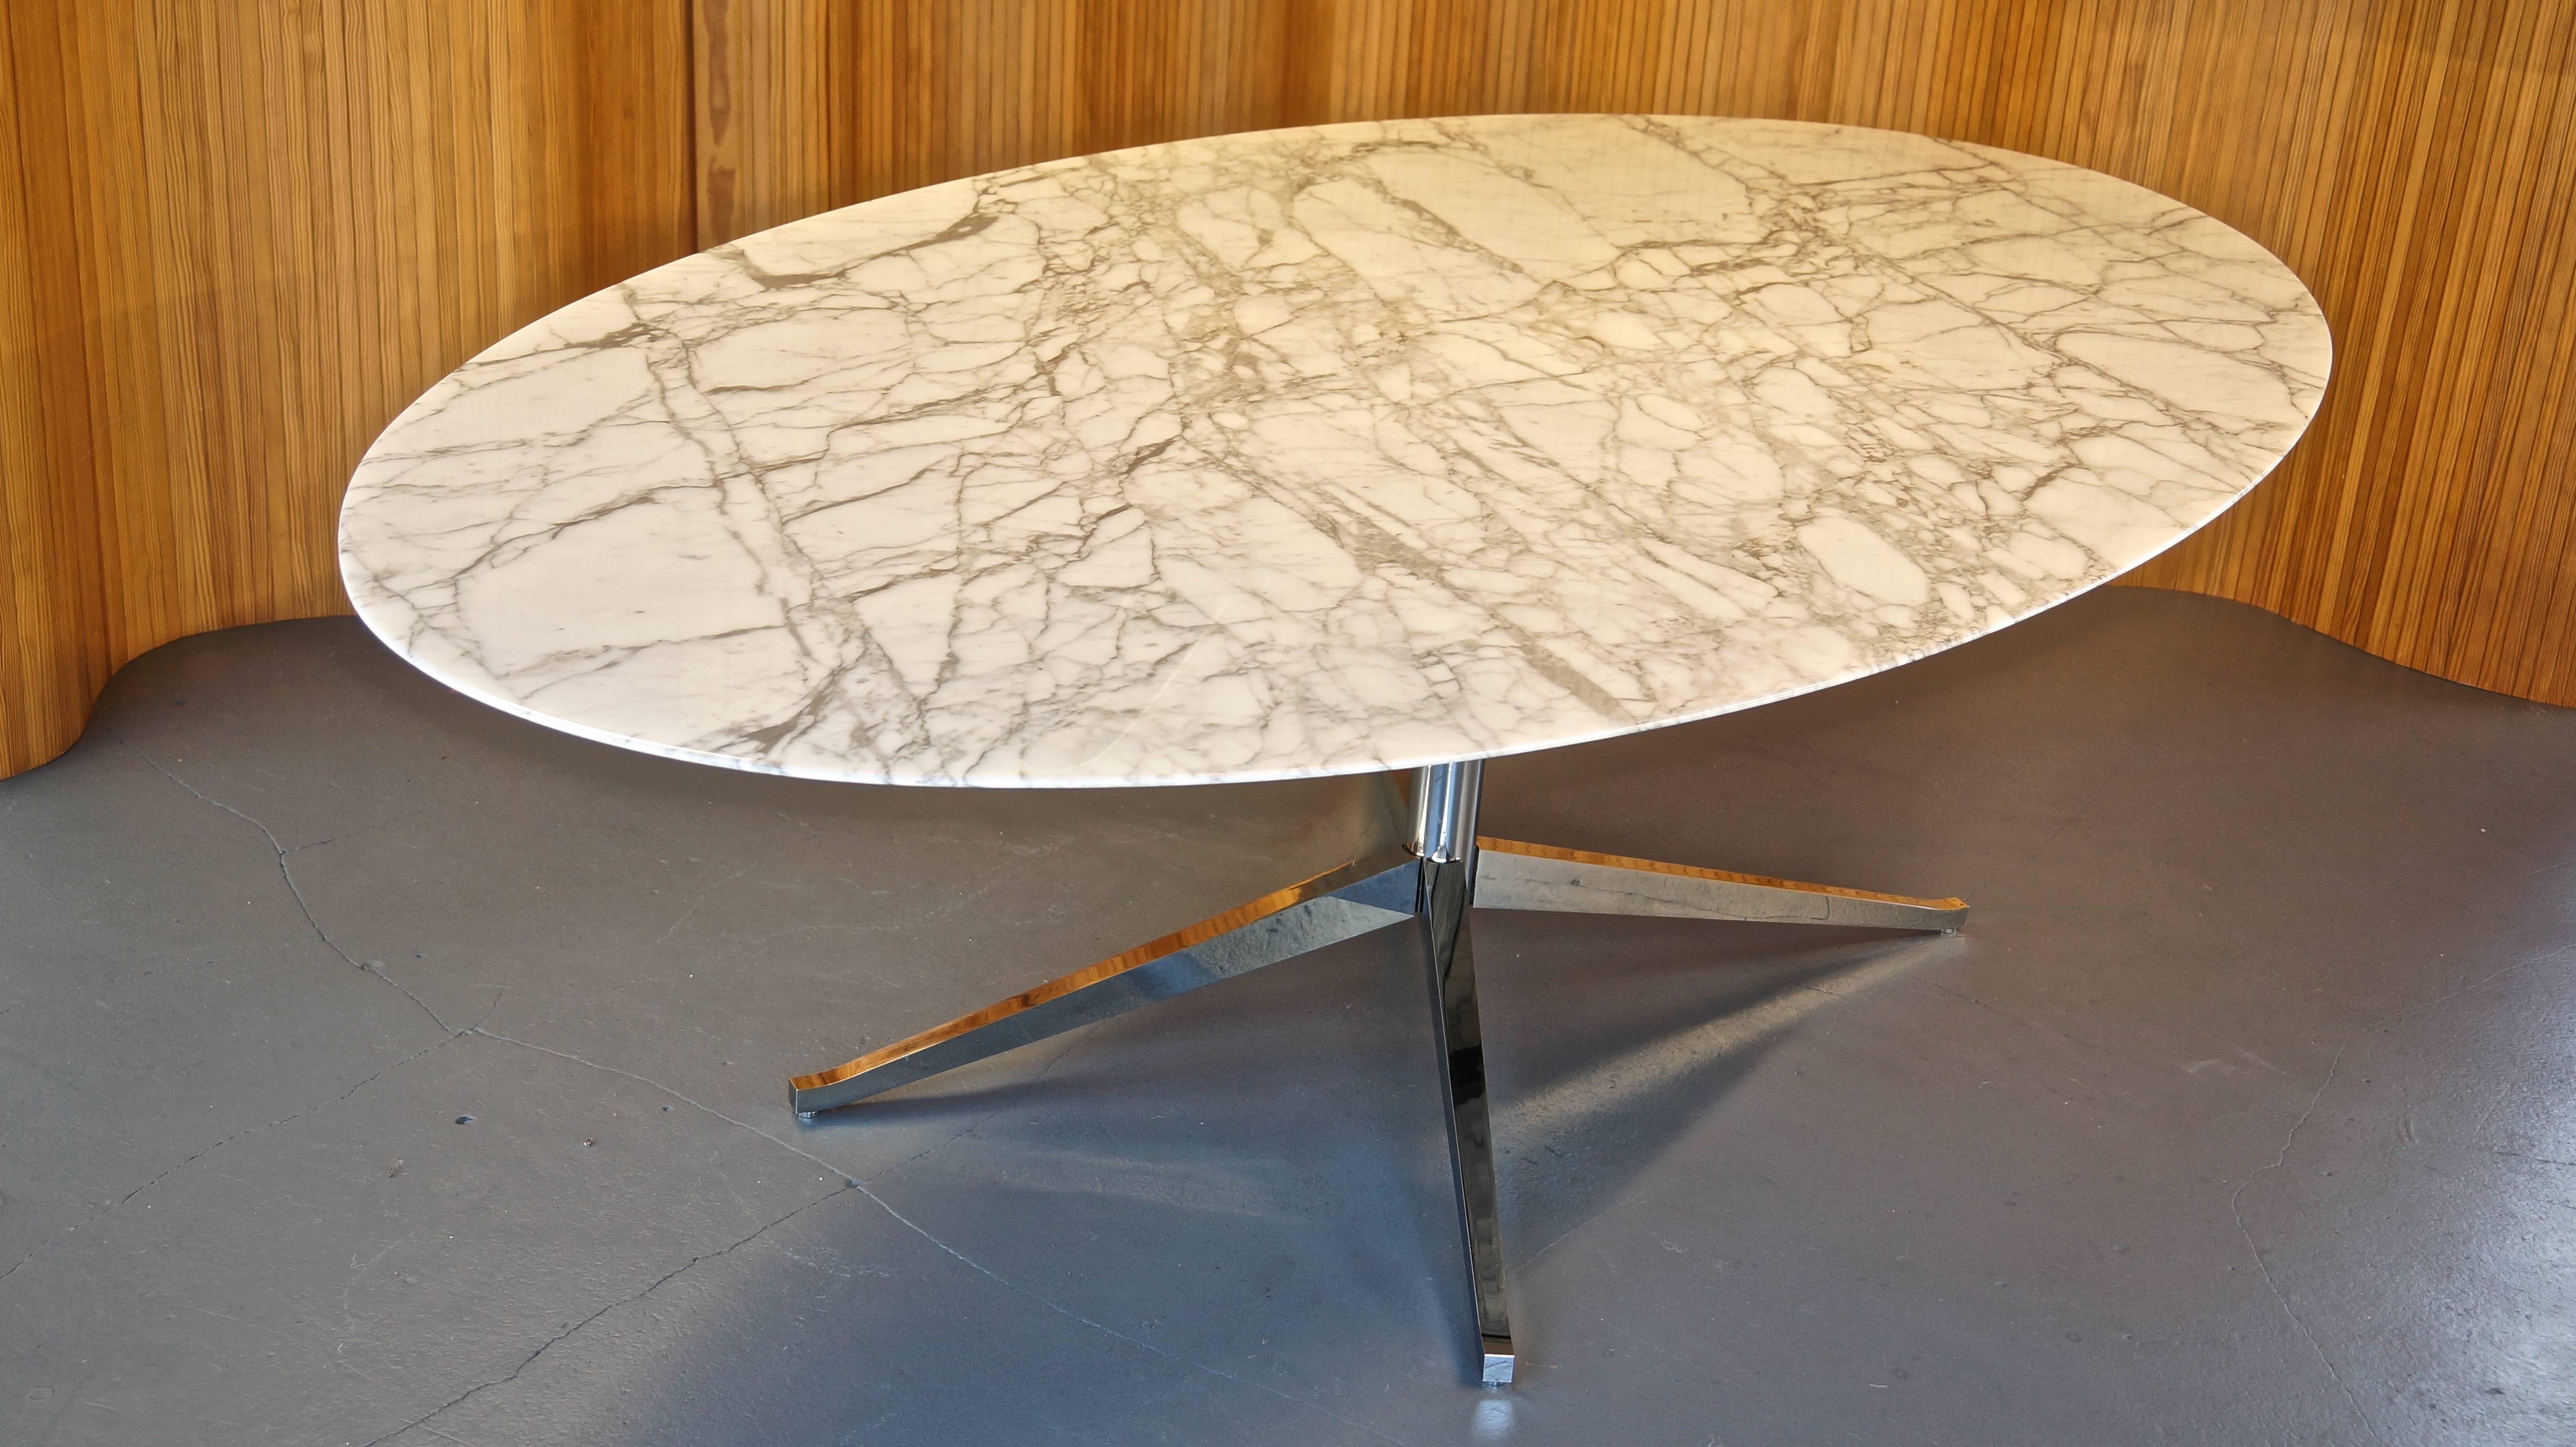 Florence Knoll White Calacatta Oval Marble Dining Table, Desk / Tulip Table 1